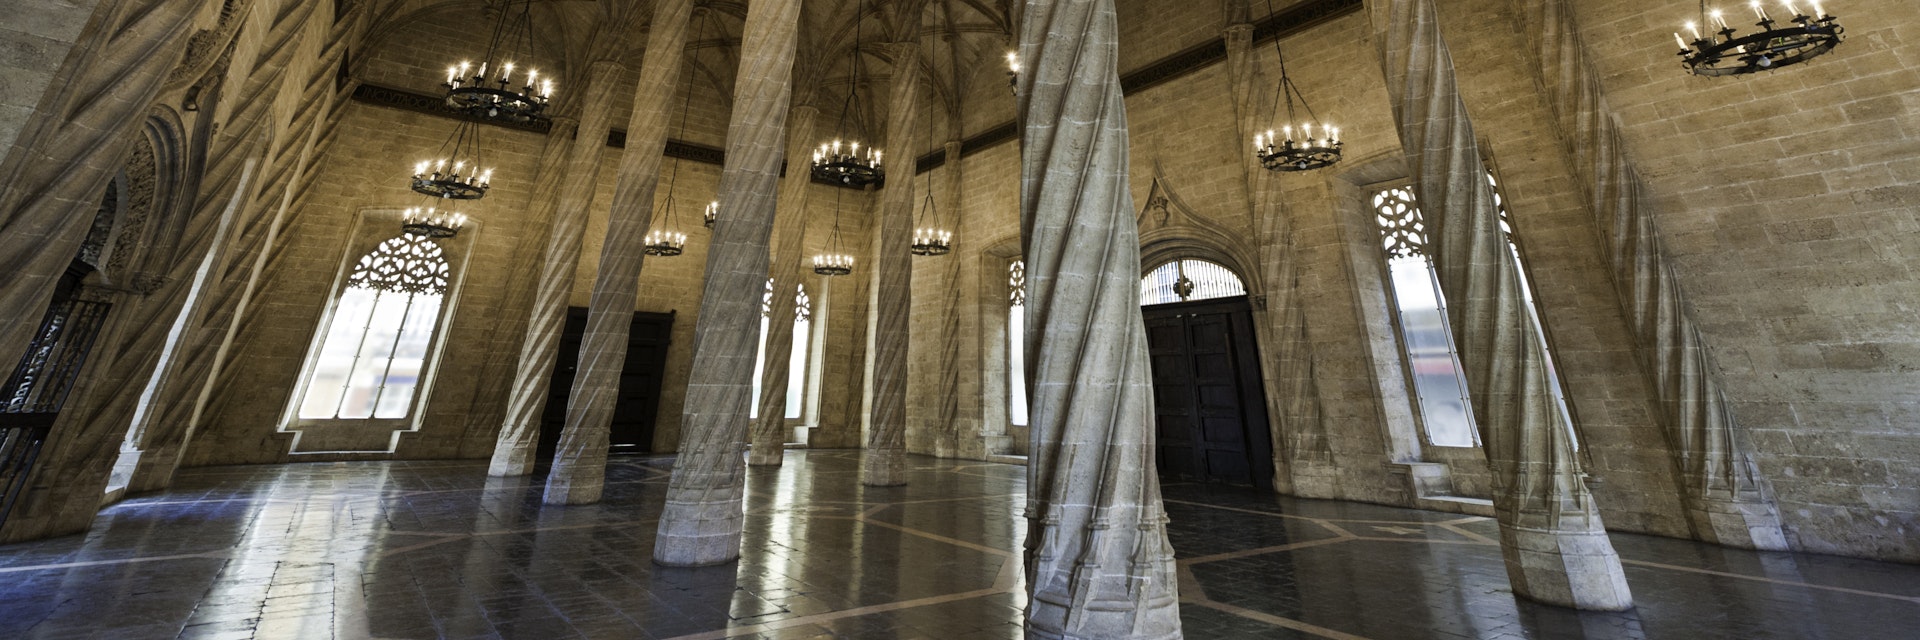 "The slender gothic columns and renaissance vaulted ceiling the the Lonja de la Seda, the Silk Exchange, UNESCO World Heritage Site in the heart of Valencia's old town, Spain. ProPhoto RGB profile for maximum color fidelity and gamut. NB: Slightly grainy ISO 800 image."